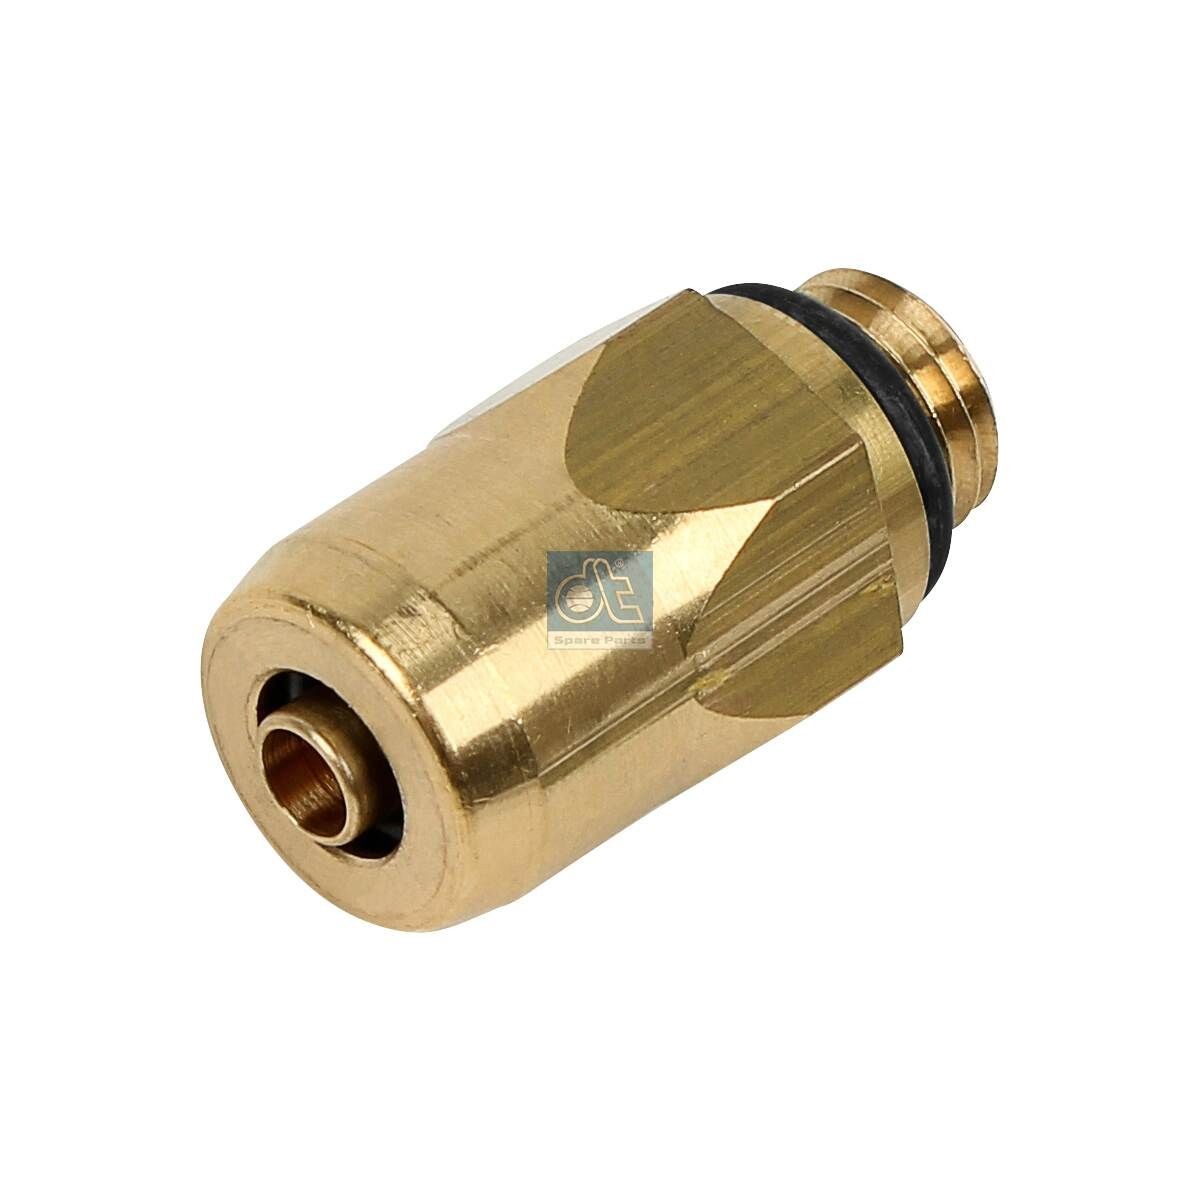 DT Spare Parts Cable Connector 1.11750 buy